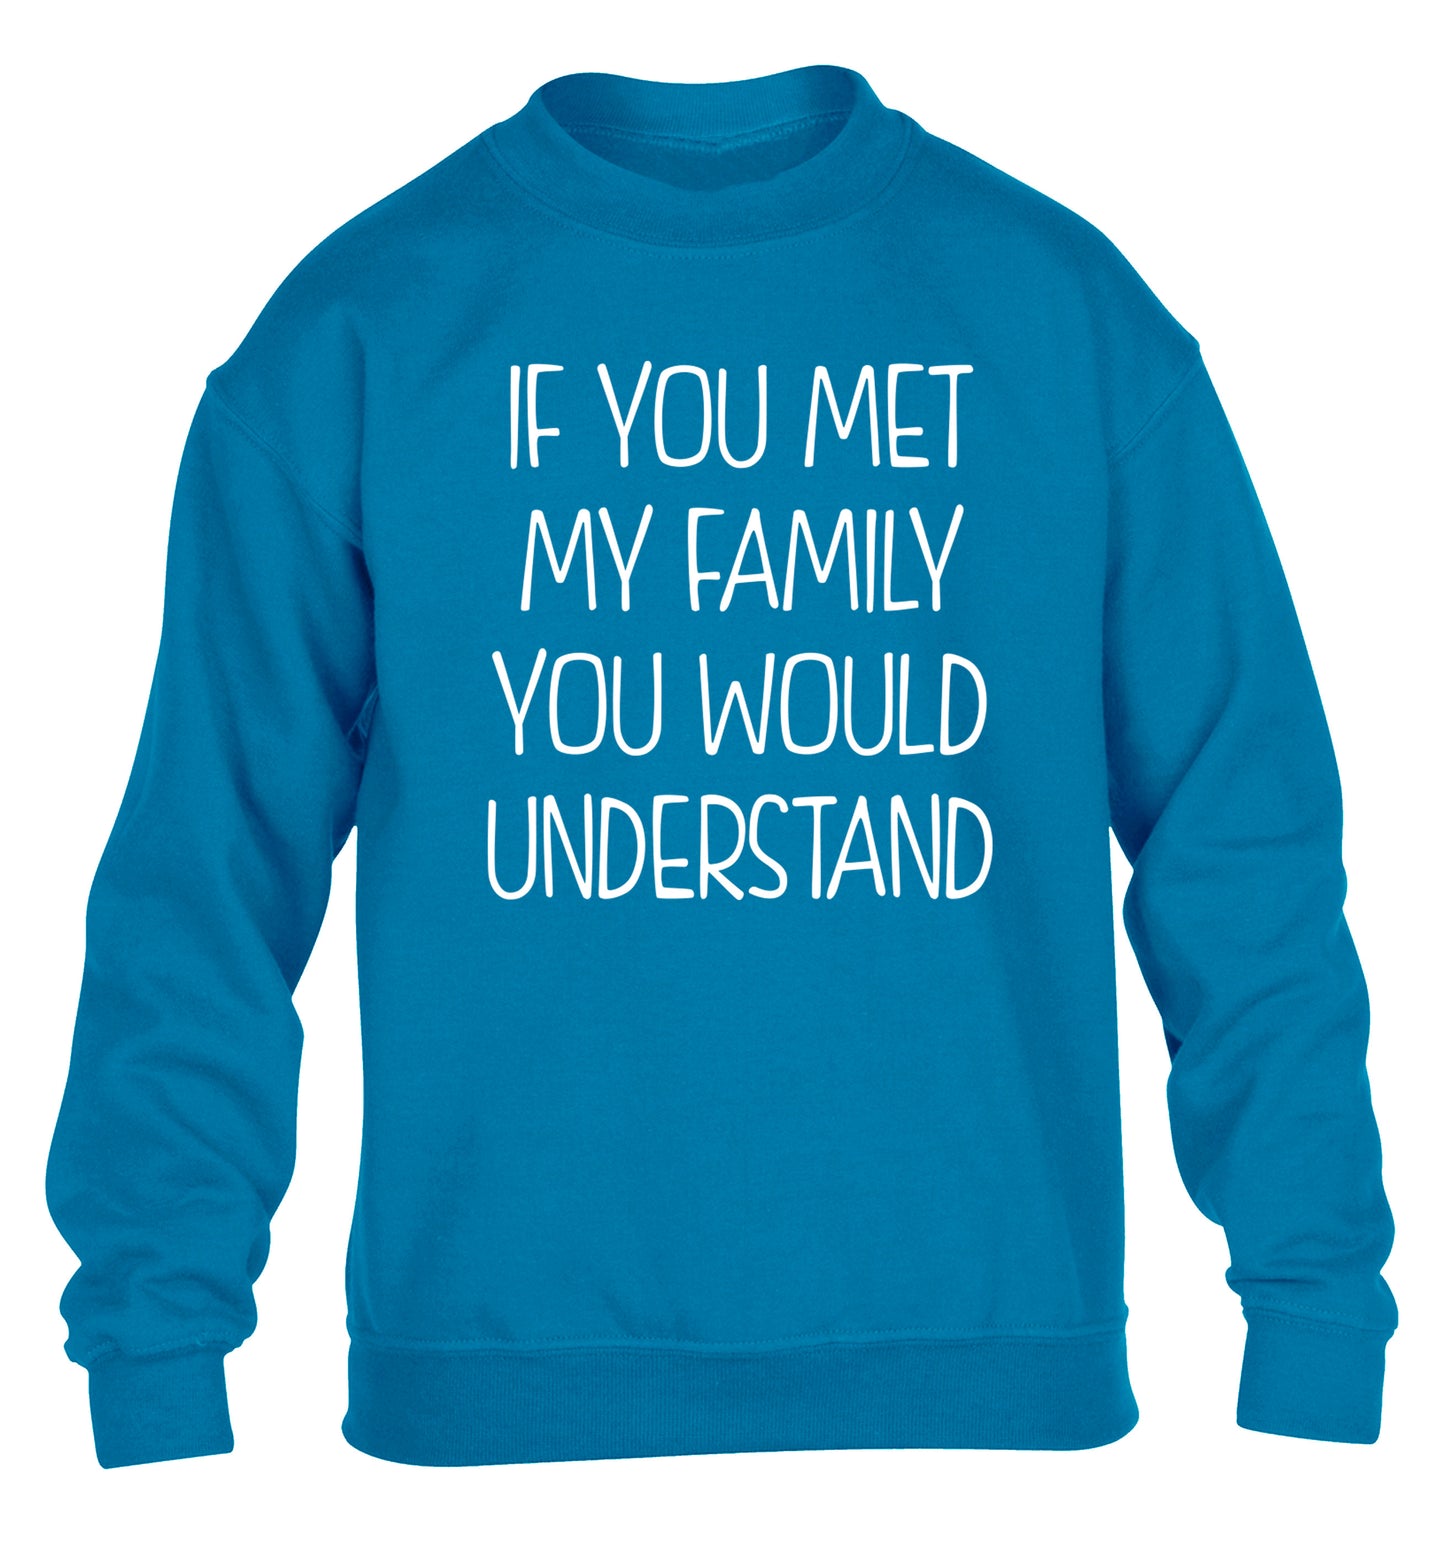 If you met my family you would understand children's blue sweater 12-13 Years